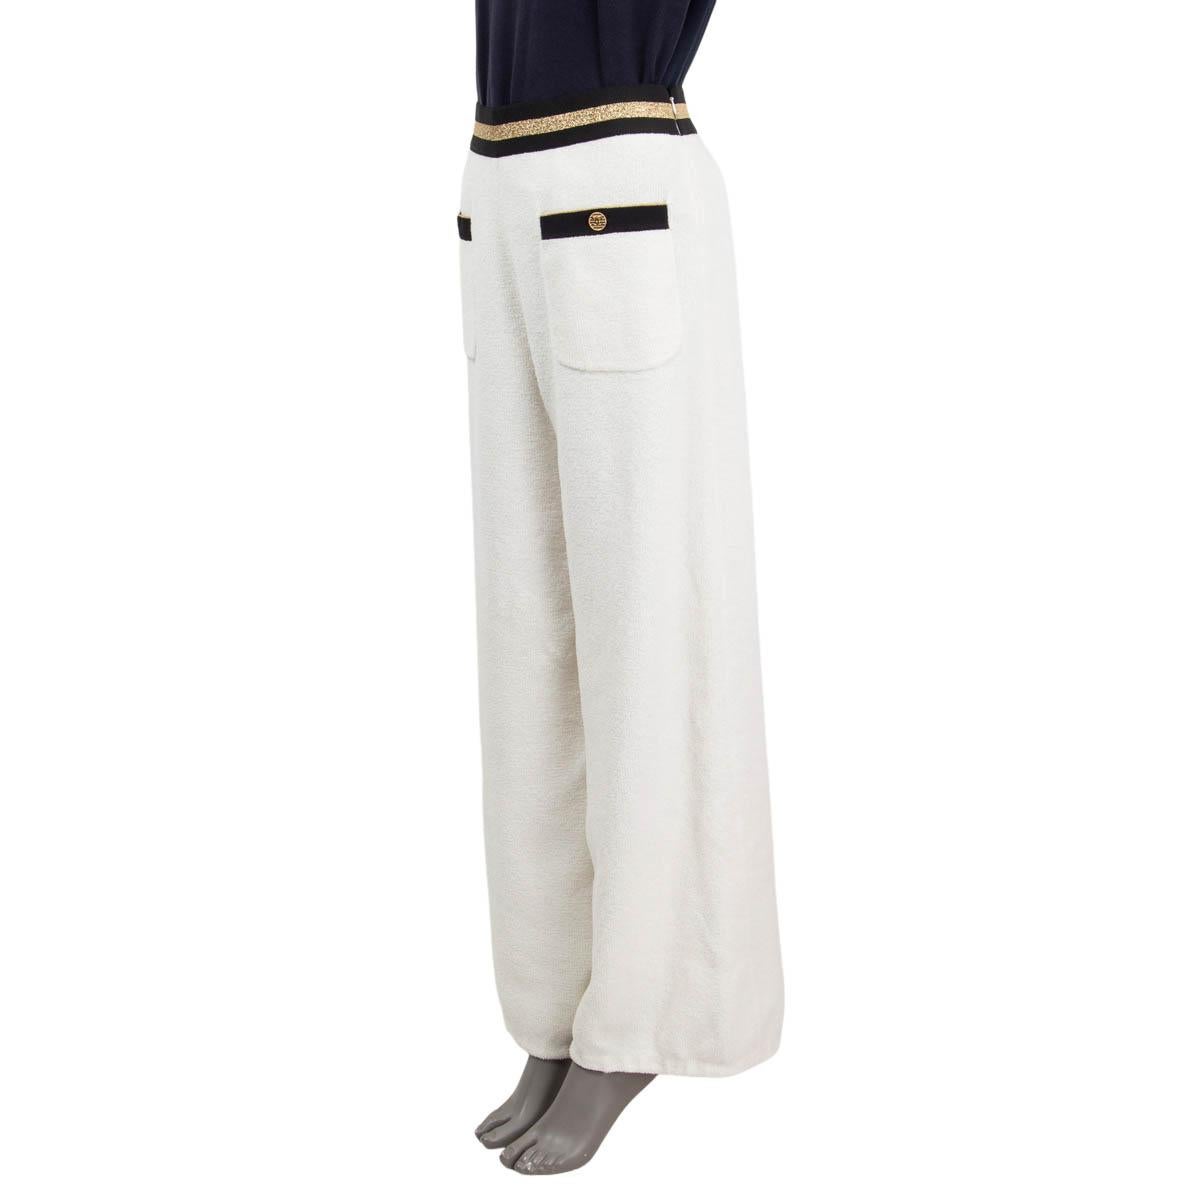 100% authentic Chanel 2019 La Pausa terrycloth wide leg pants in white cotton (83%) and polyamide (17%), with an elastic waistband in black and gold polyester (70%), latex (25%) and polyamide (5%). Feature two 'CC' buttoned patch pockets on the